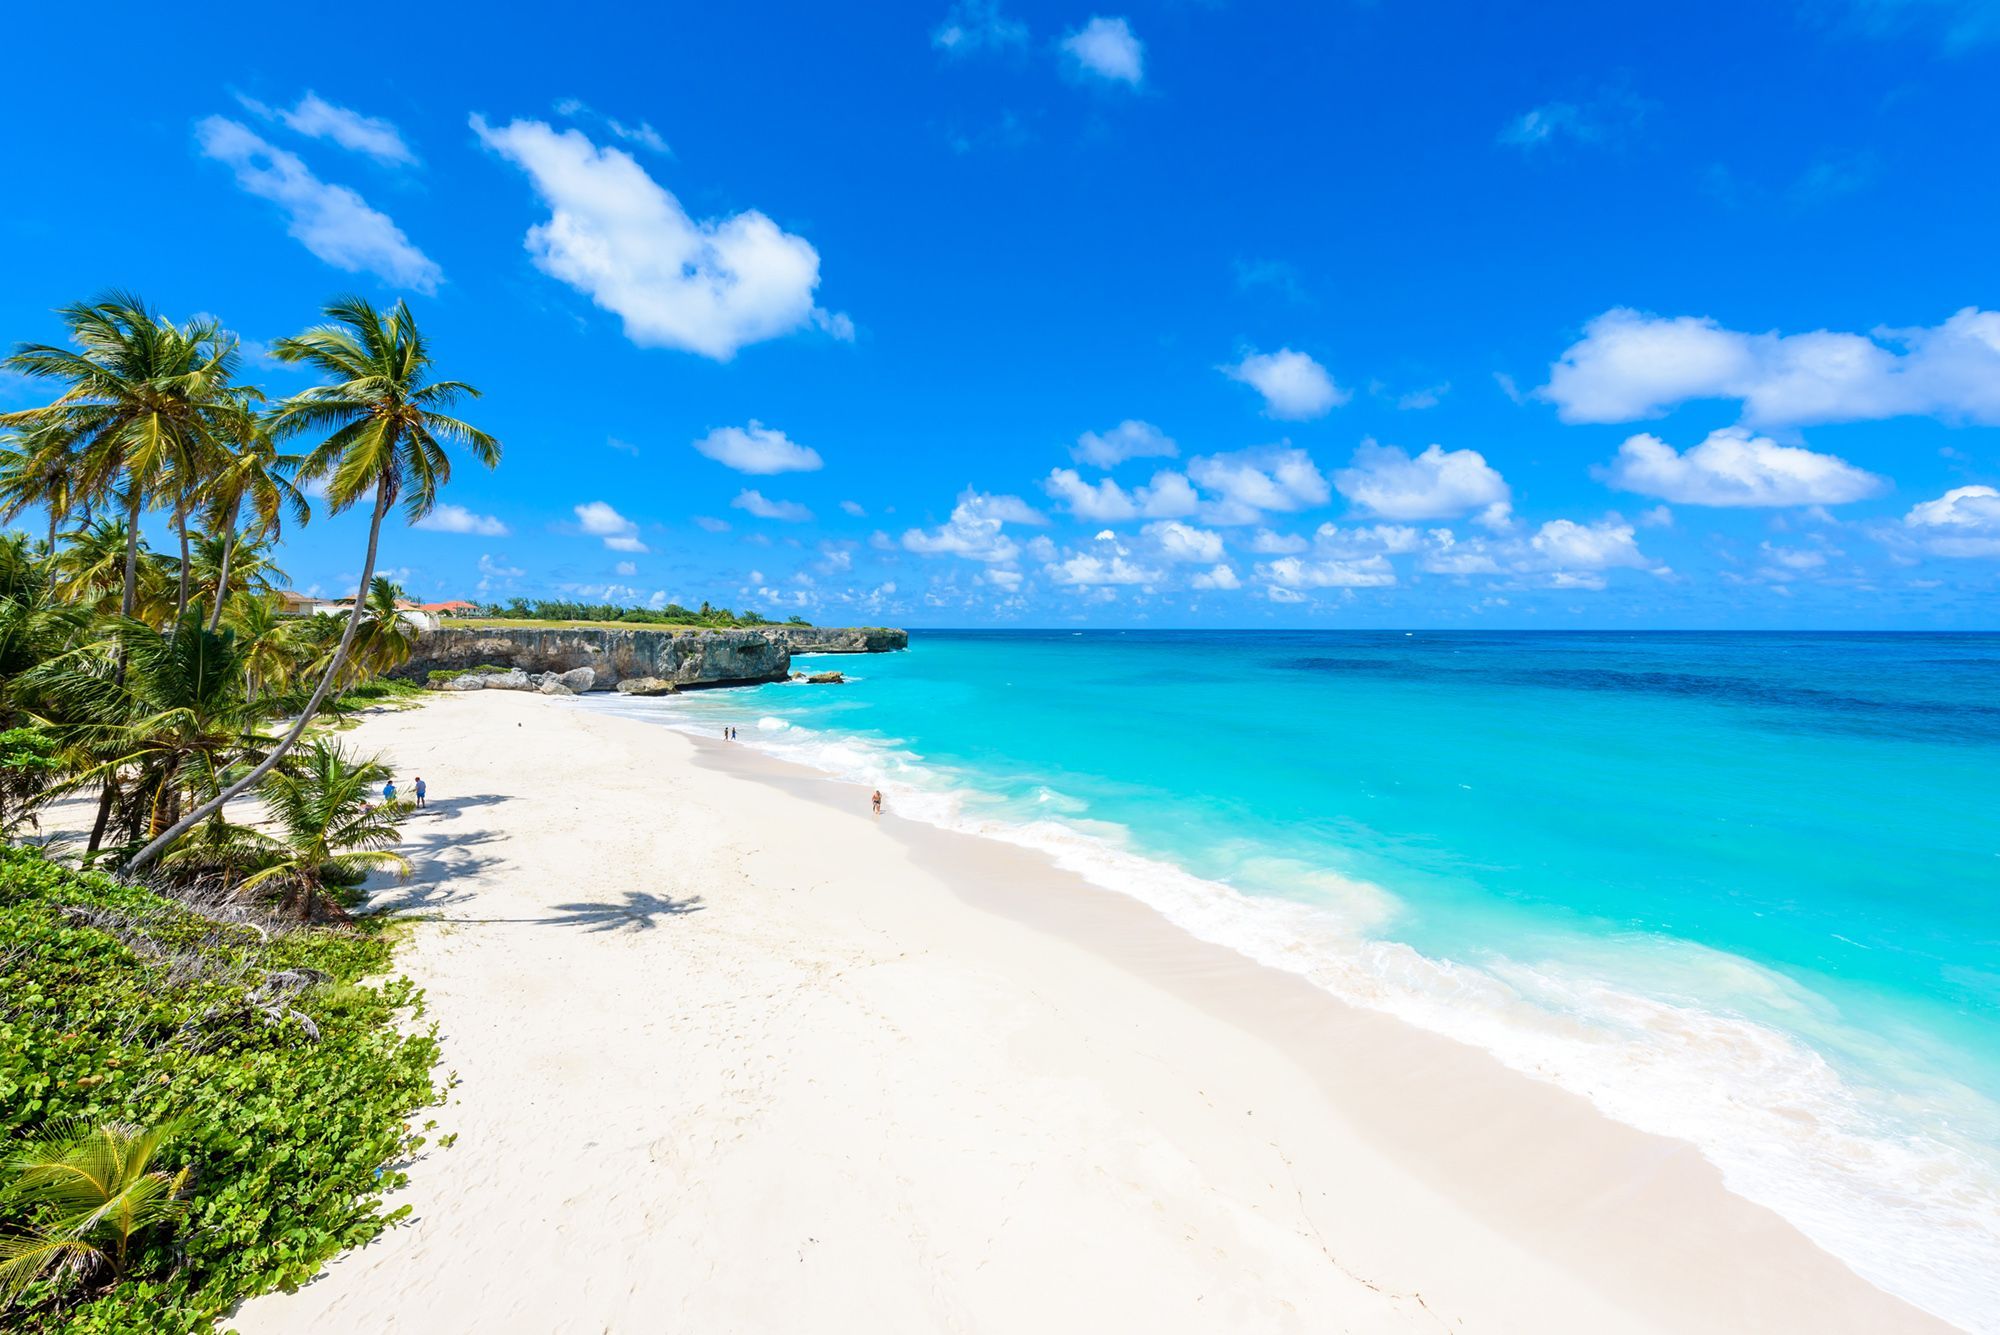 A Love For Romance: Barbados & Sandals Resorts – A Match Made In Heaven